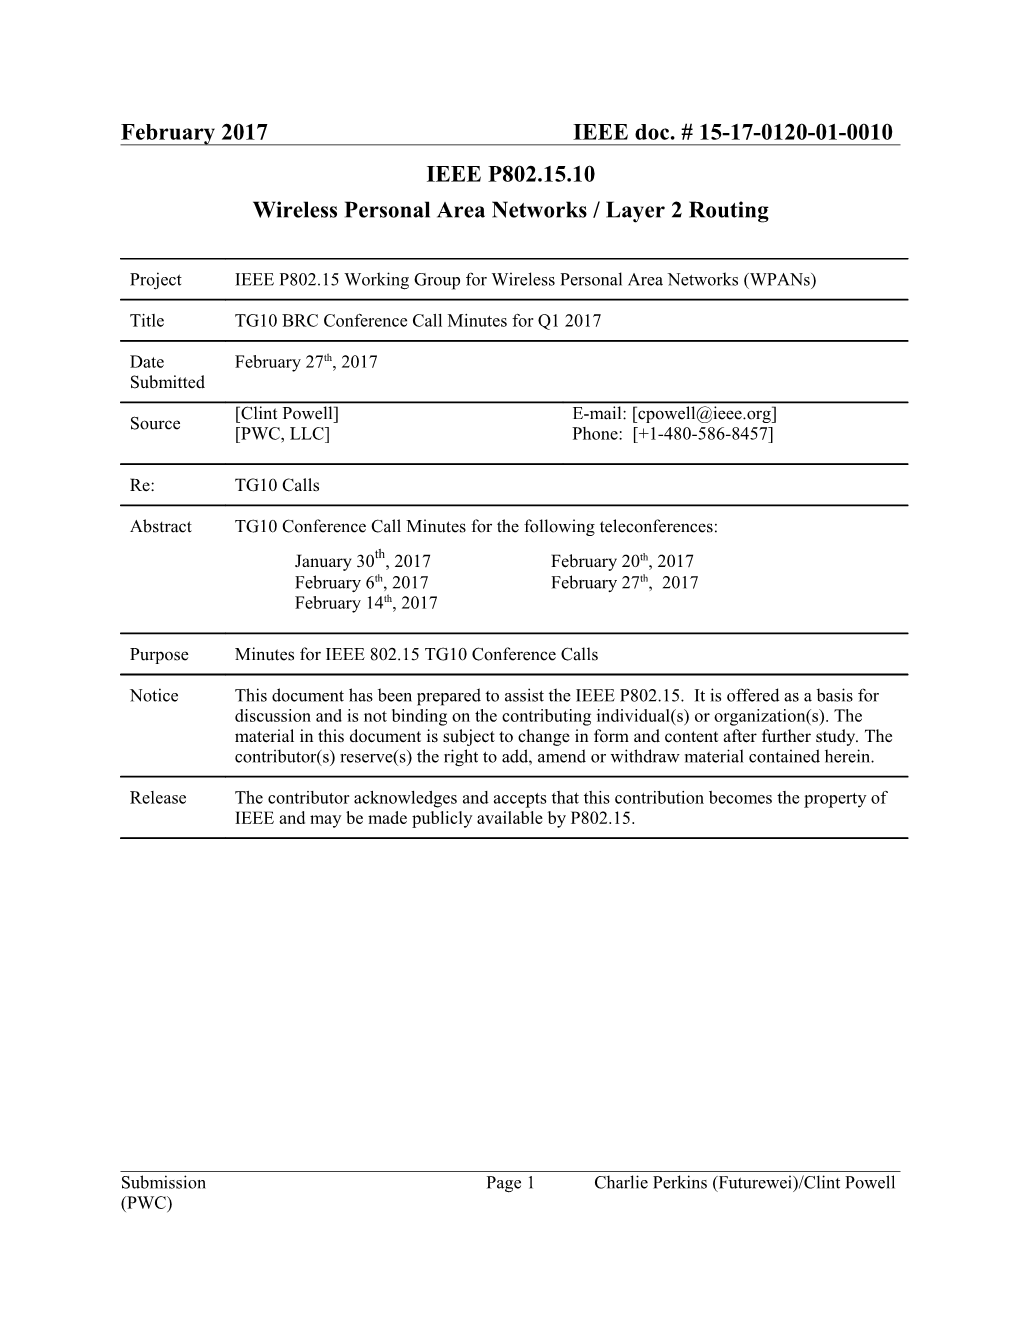 Wireless Personal Area Networks / Layer 2 Routing